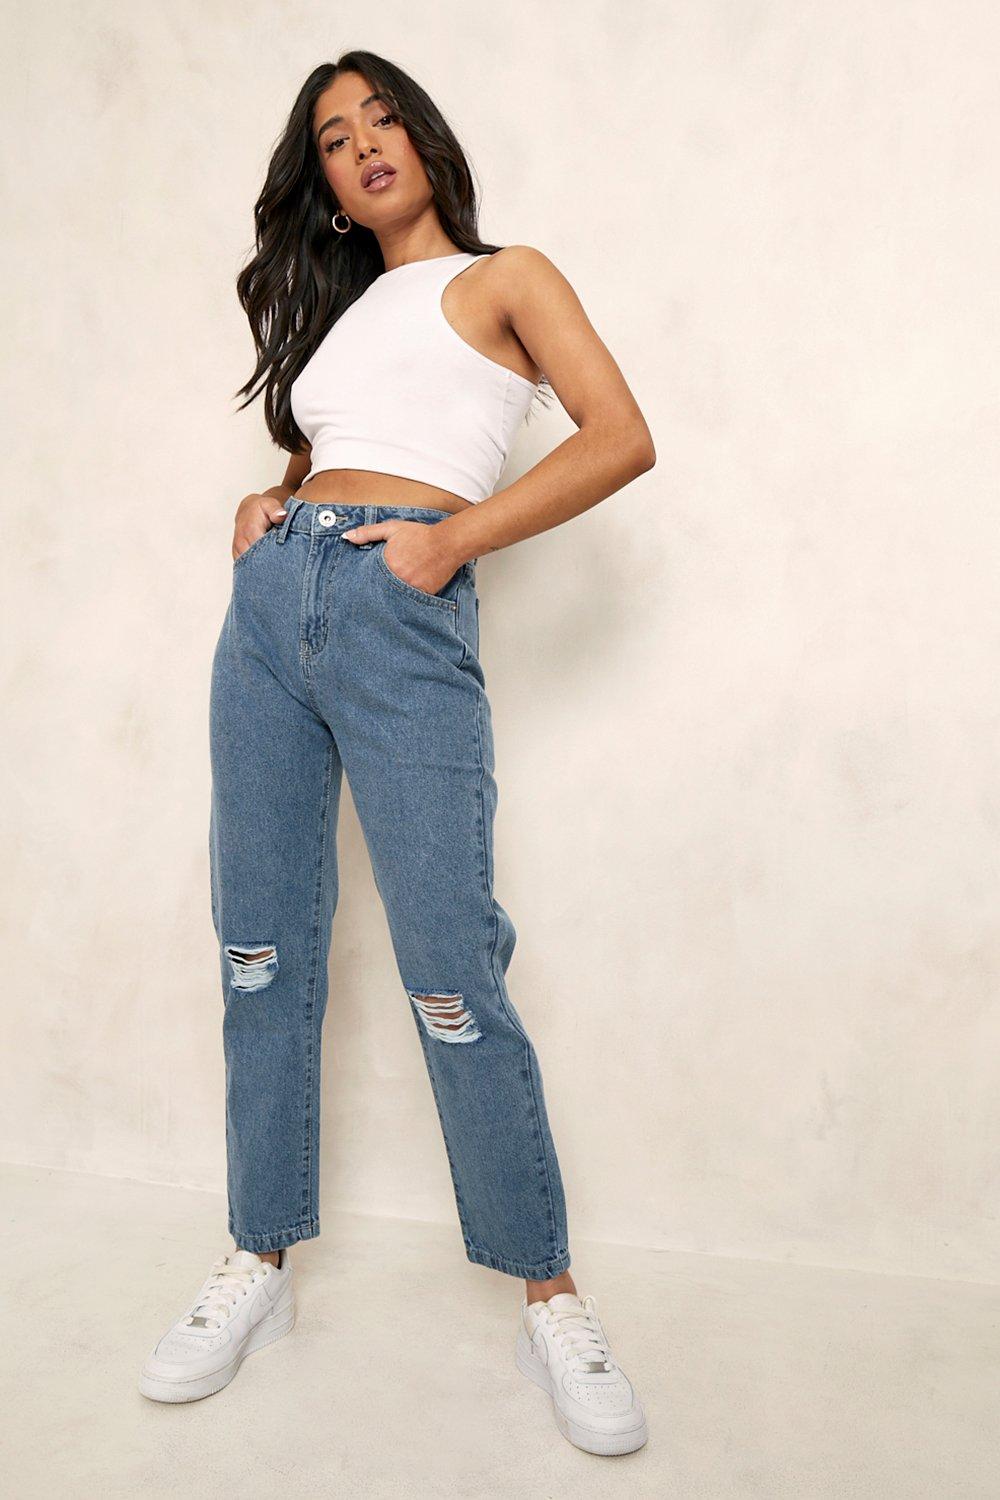 Highwaist Jeans and Crop Top  Crop top with jeans, Ripped high